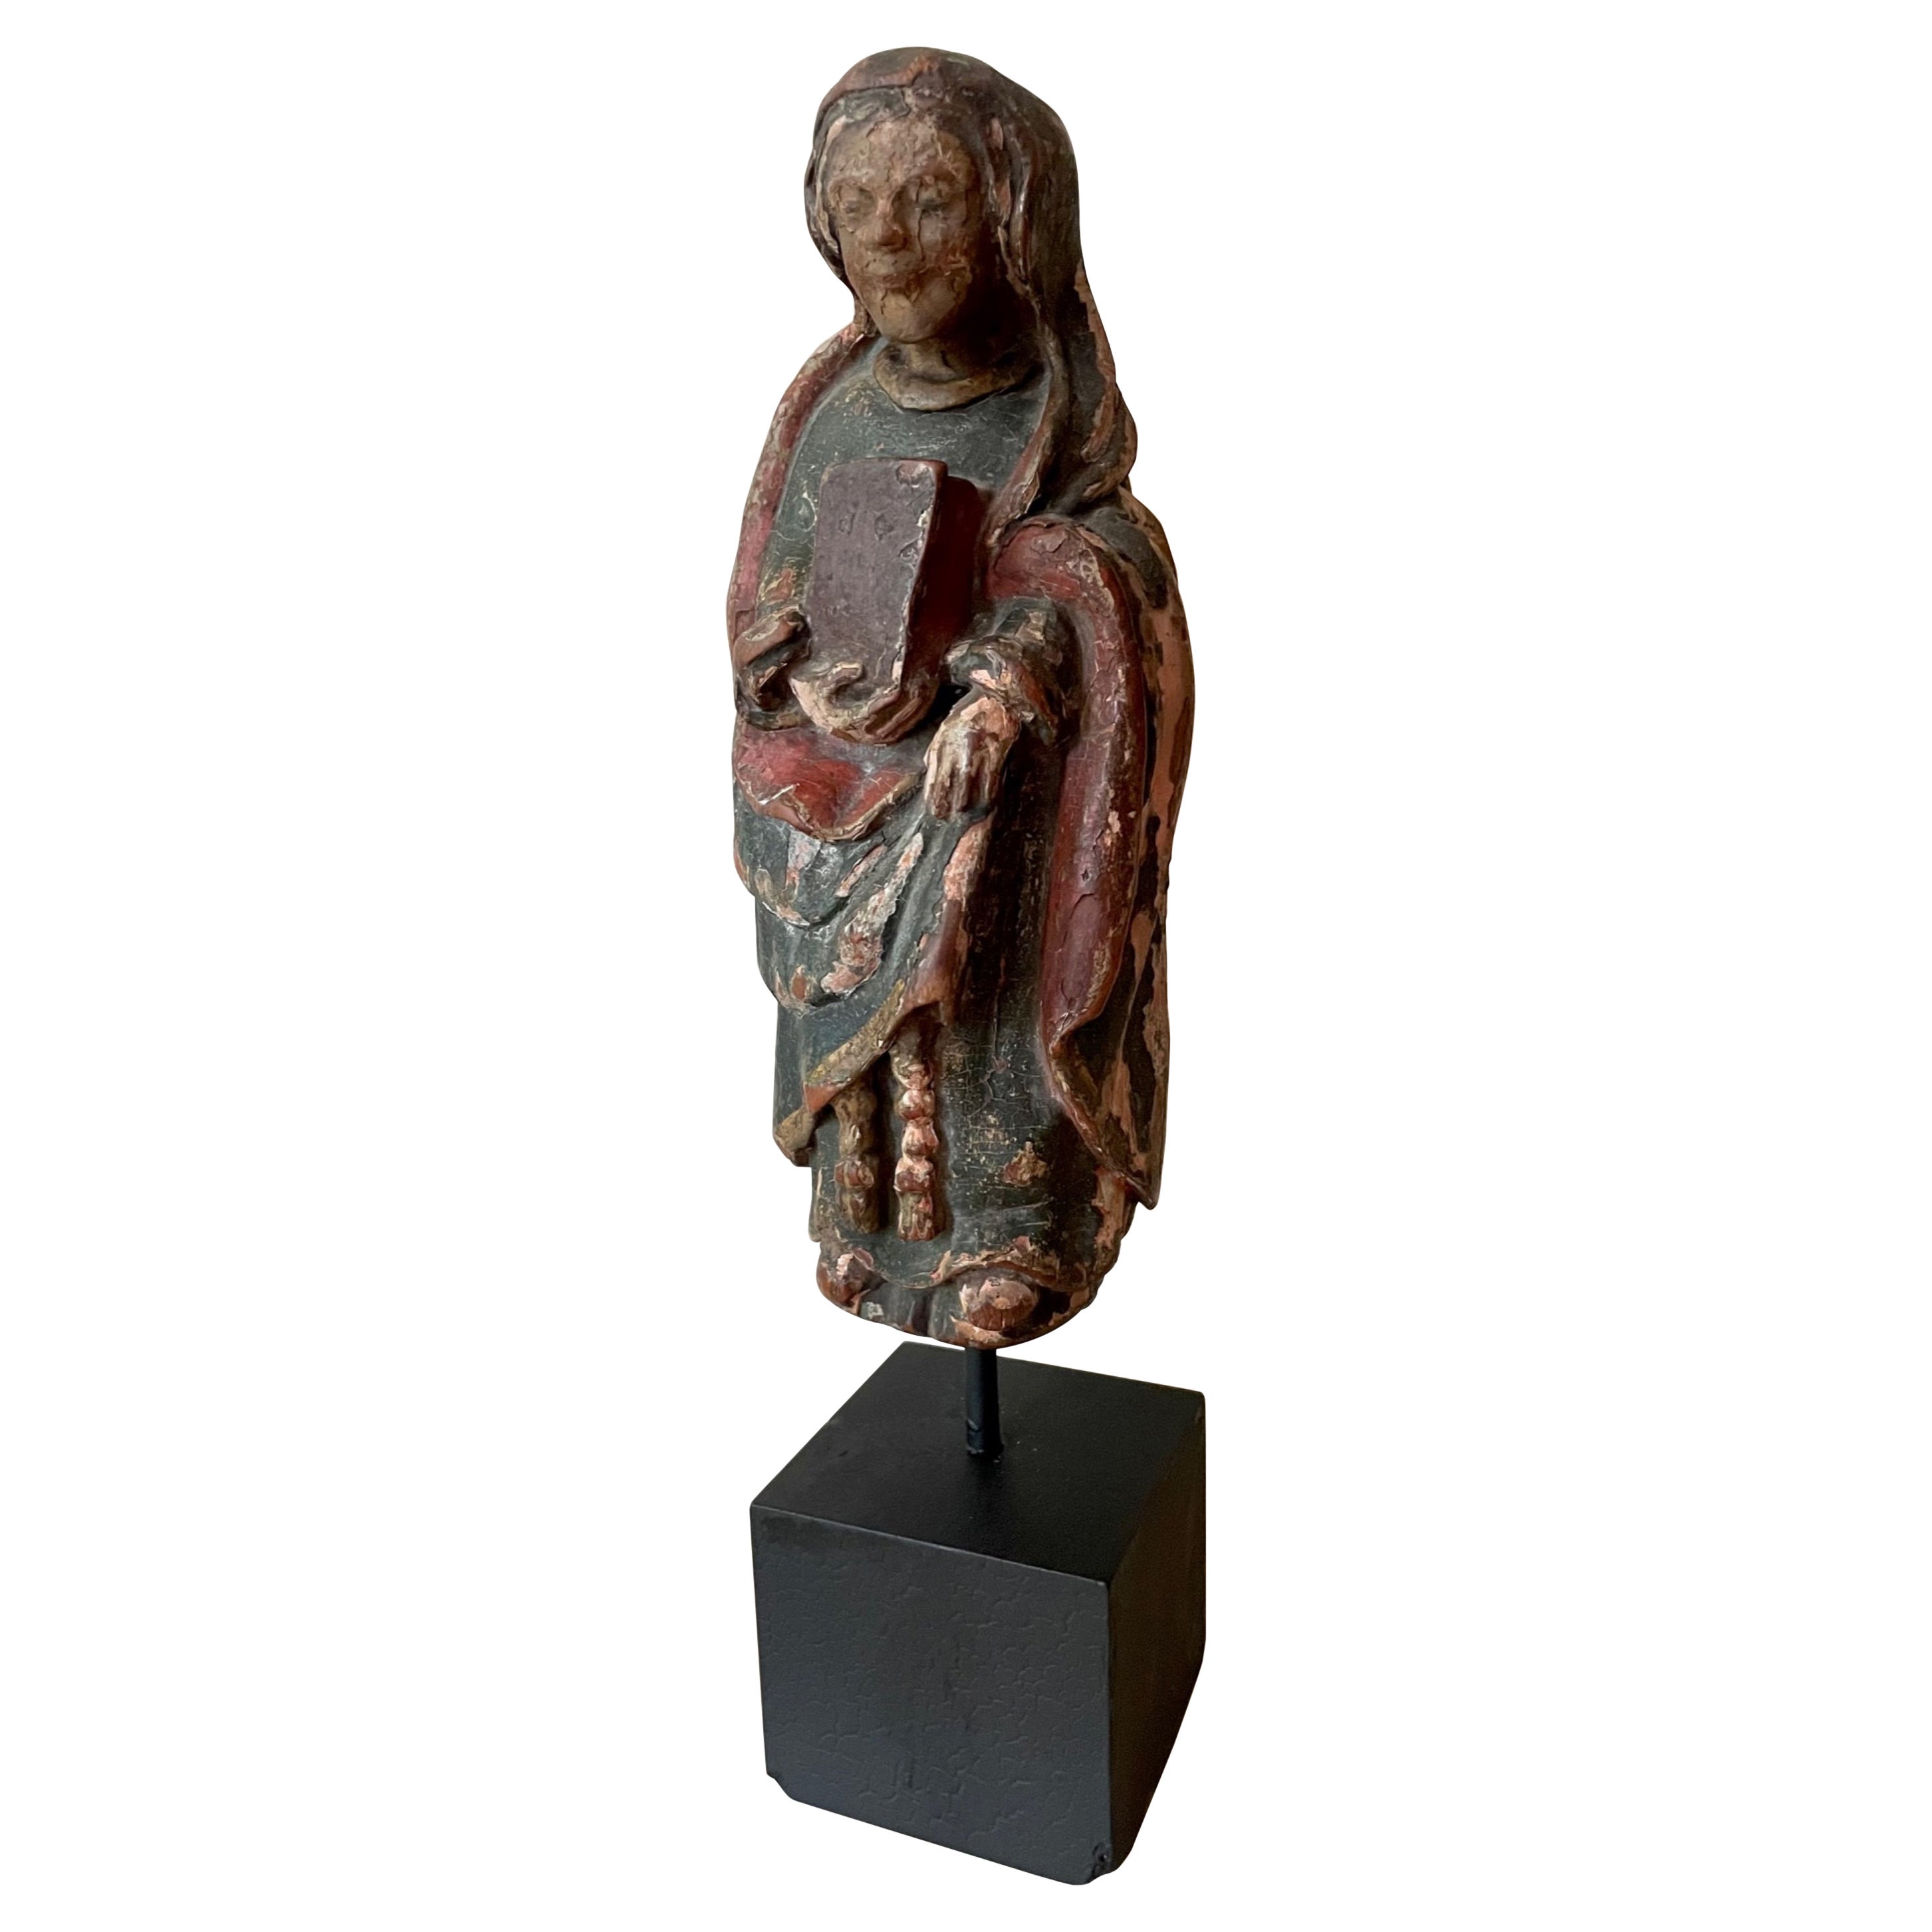 12th Century Rare Romanesque Wood Sculpture of the Virgin Mary